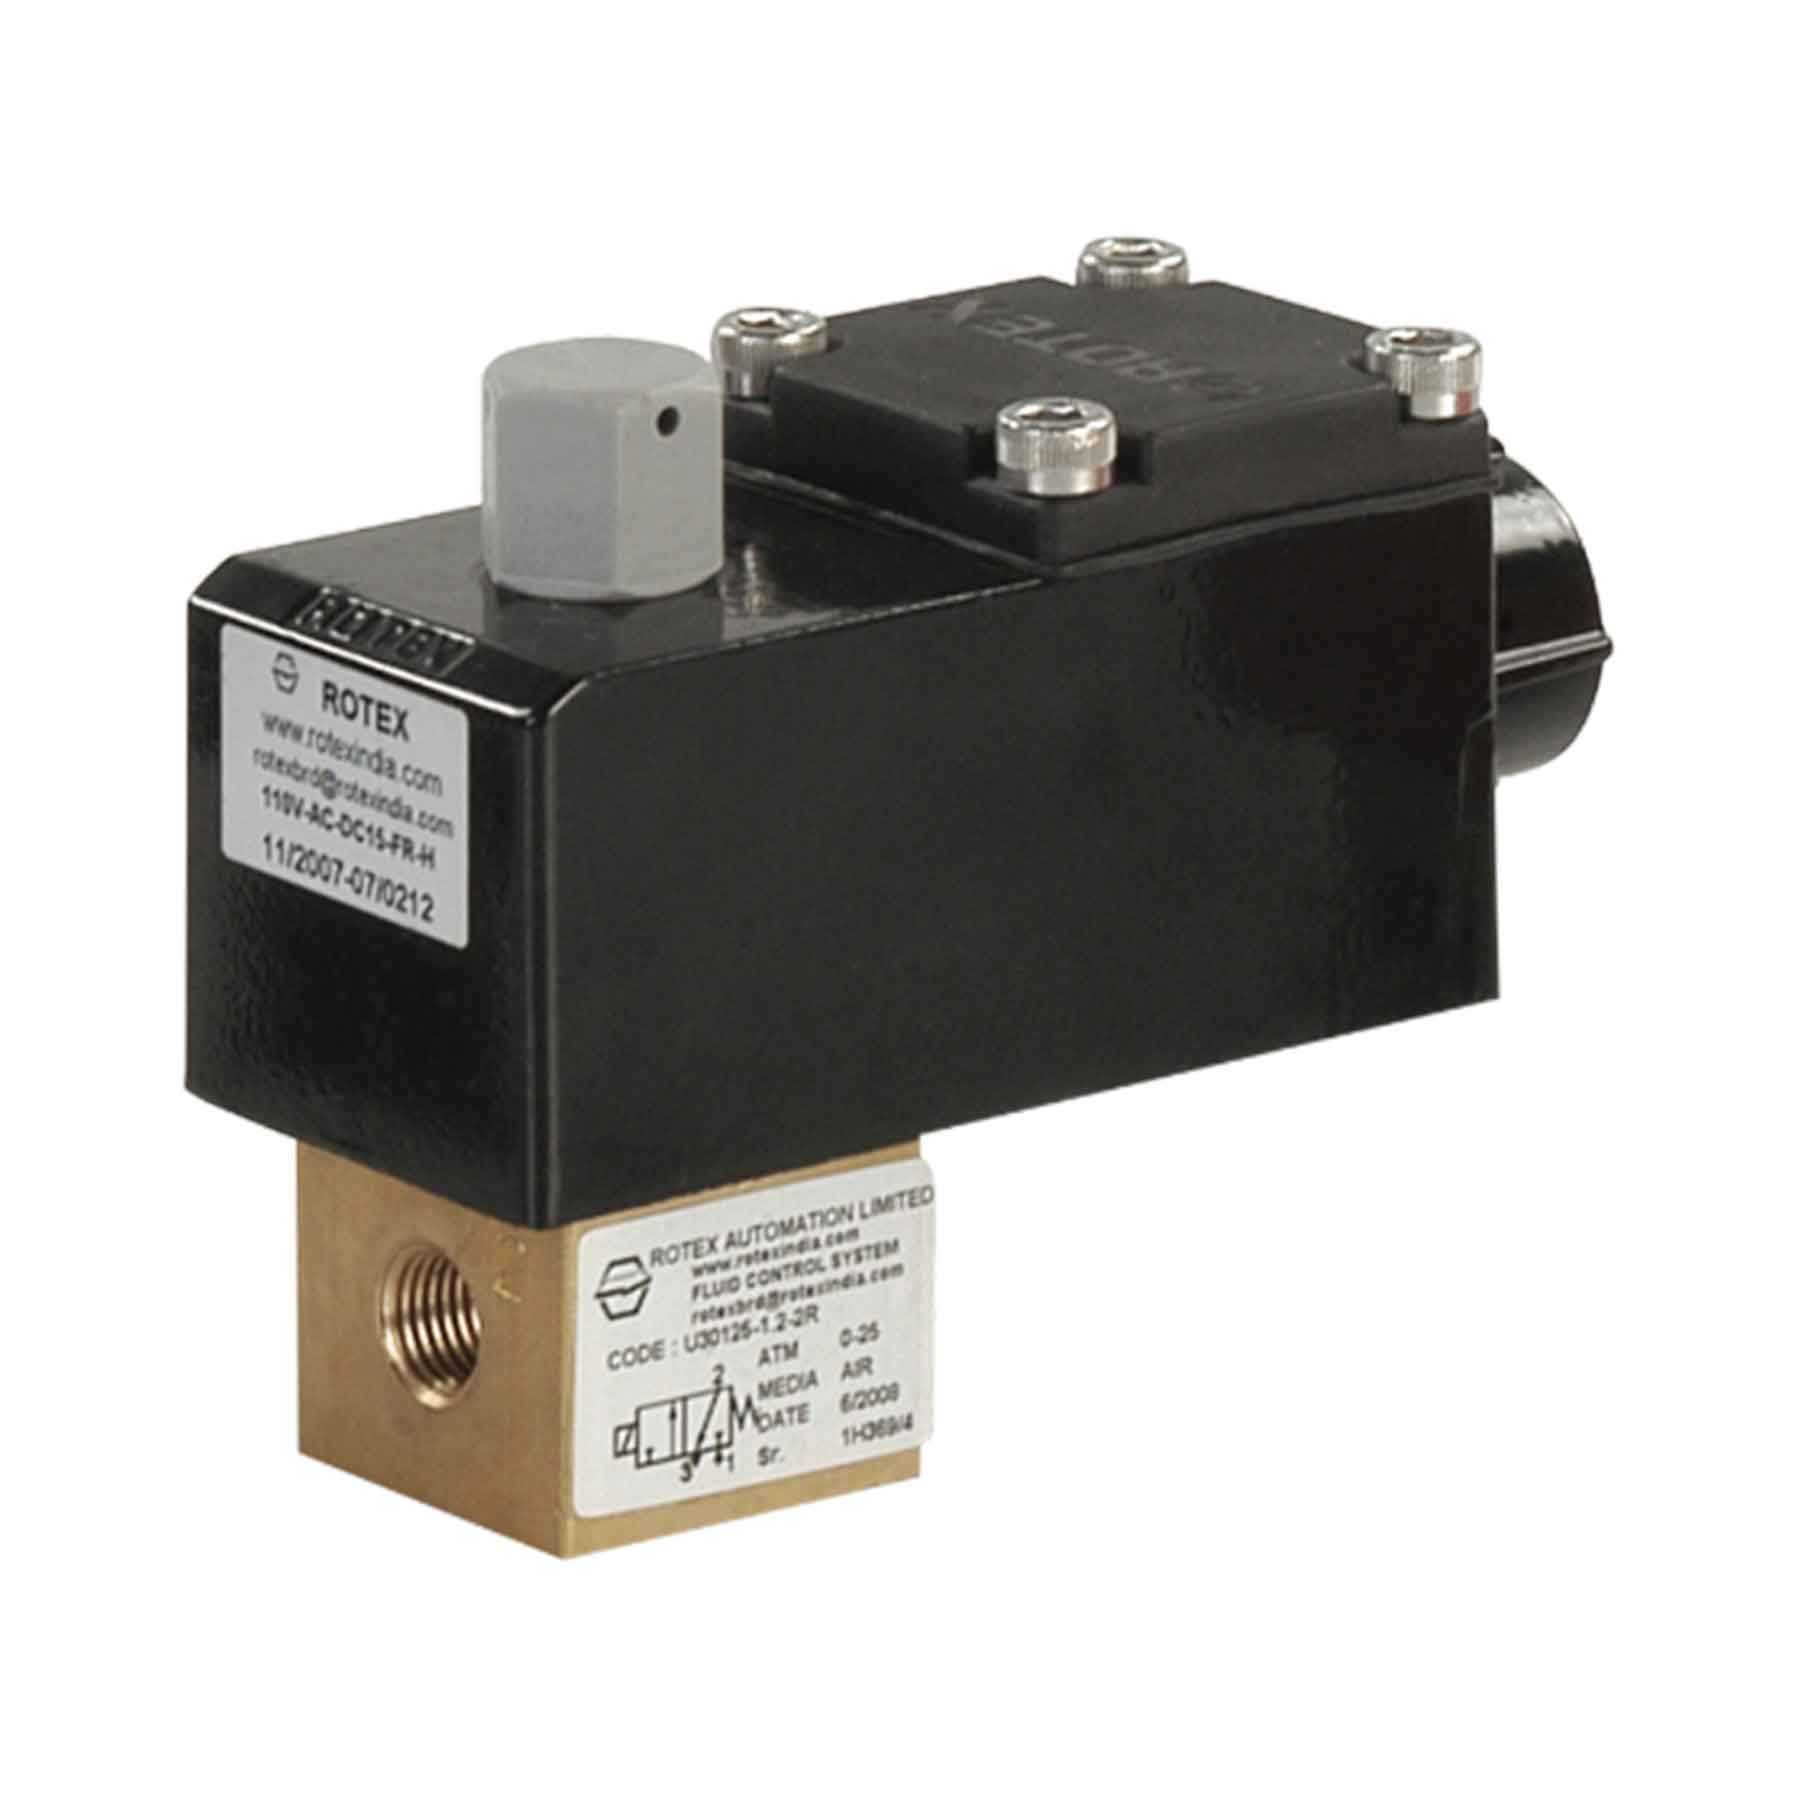 Rotex 2/2-Way Normally Closed Direct Lift Solenoid Valve 20101-2.5-2R-B5+III-24V-DC-37-H-01